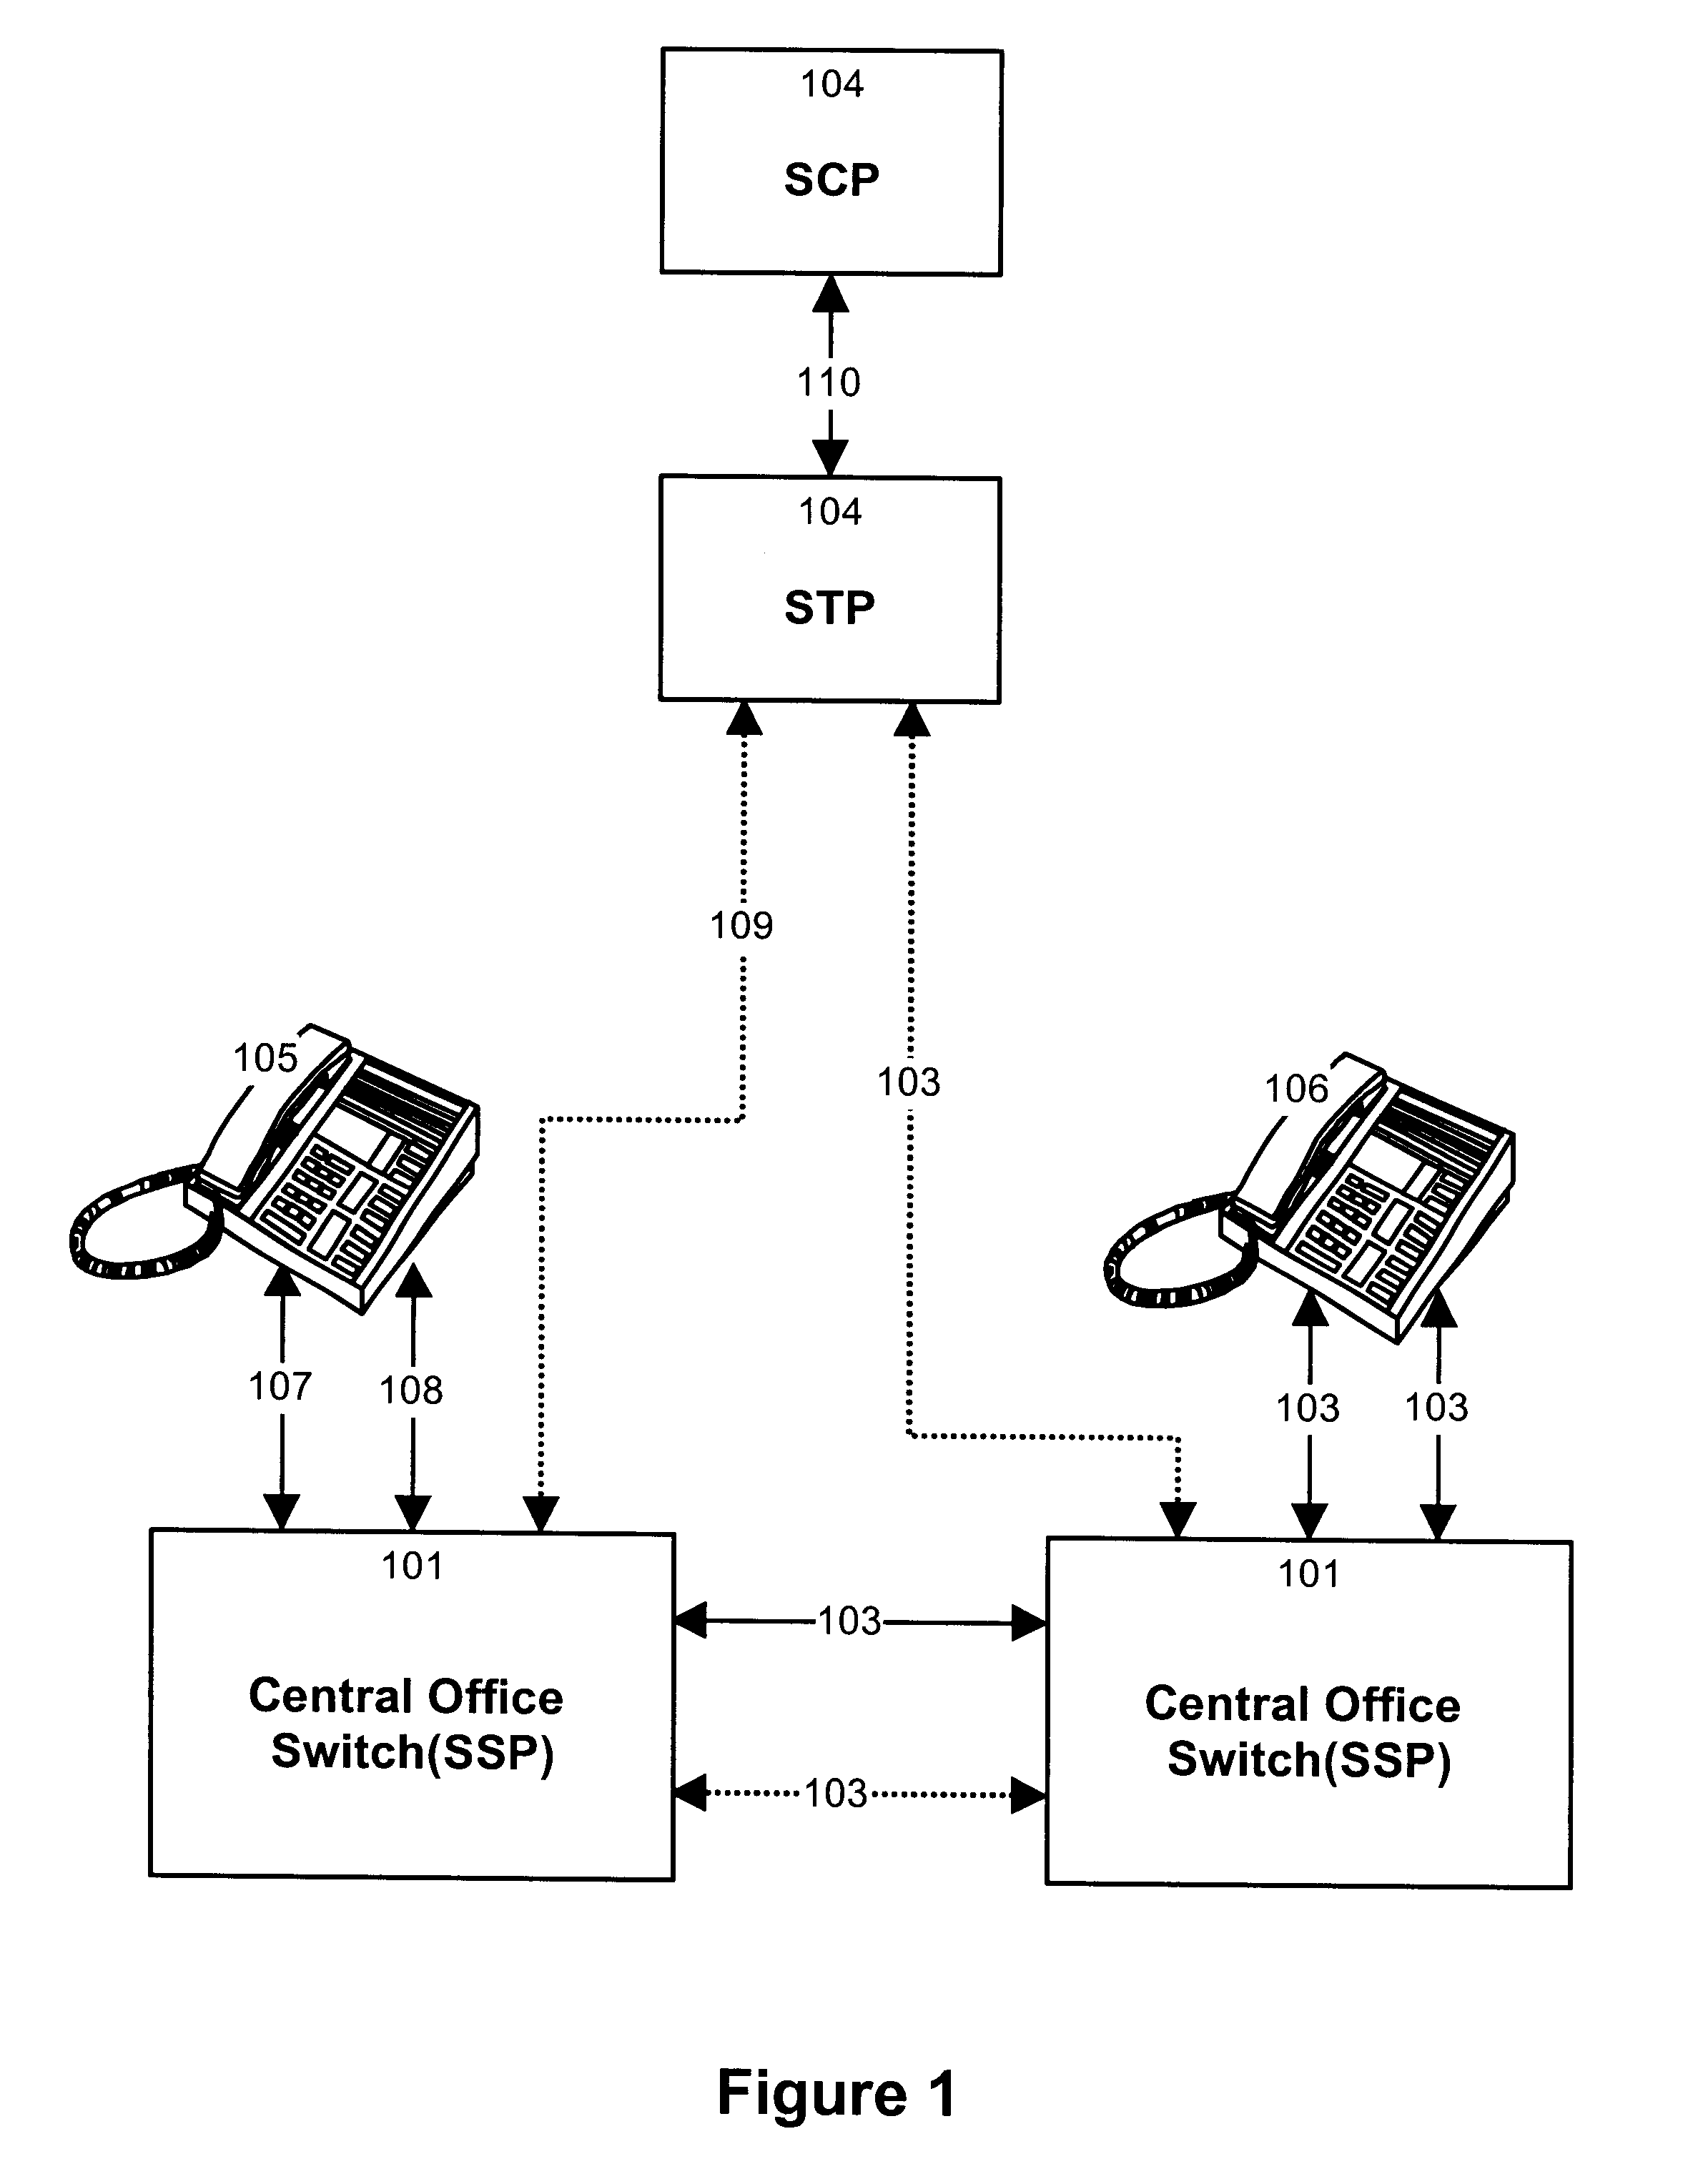 Delivery of display information to the caller in an advanced intelligent network